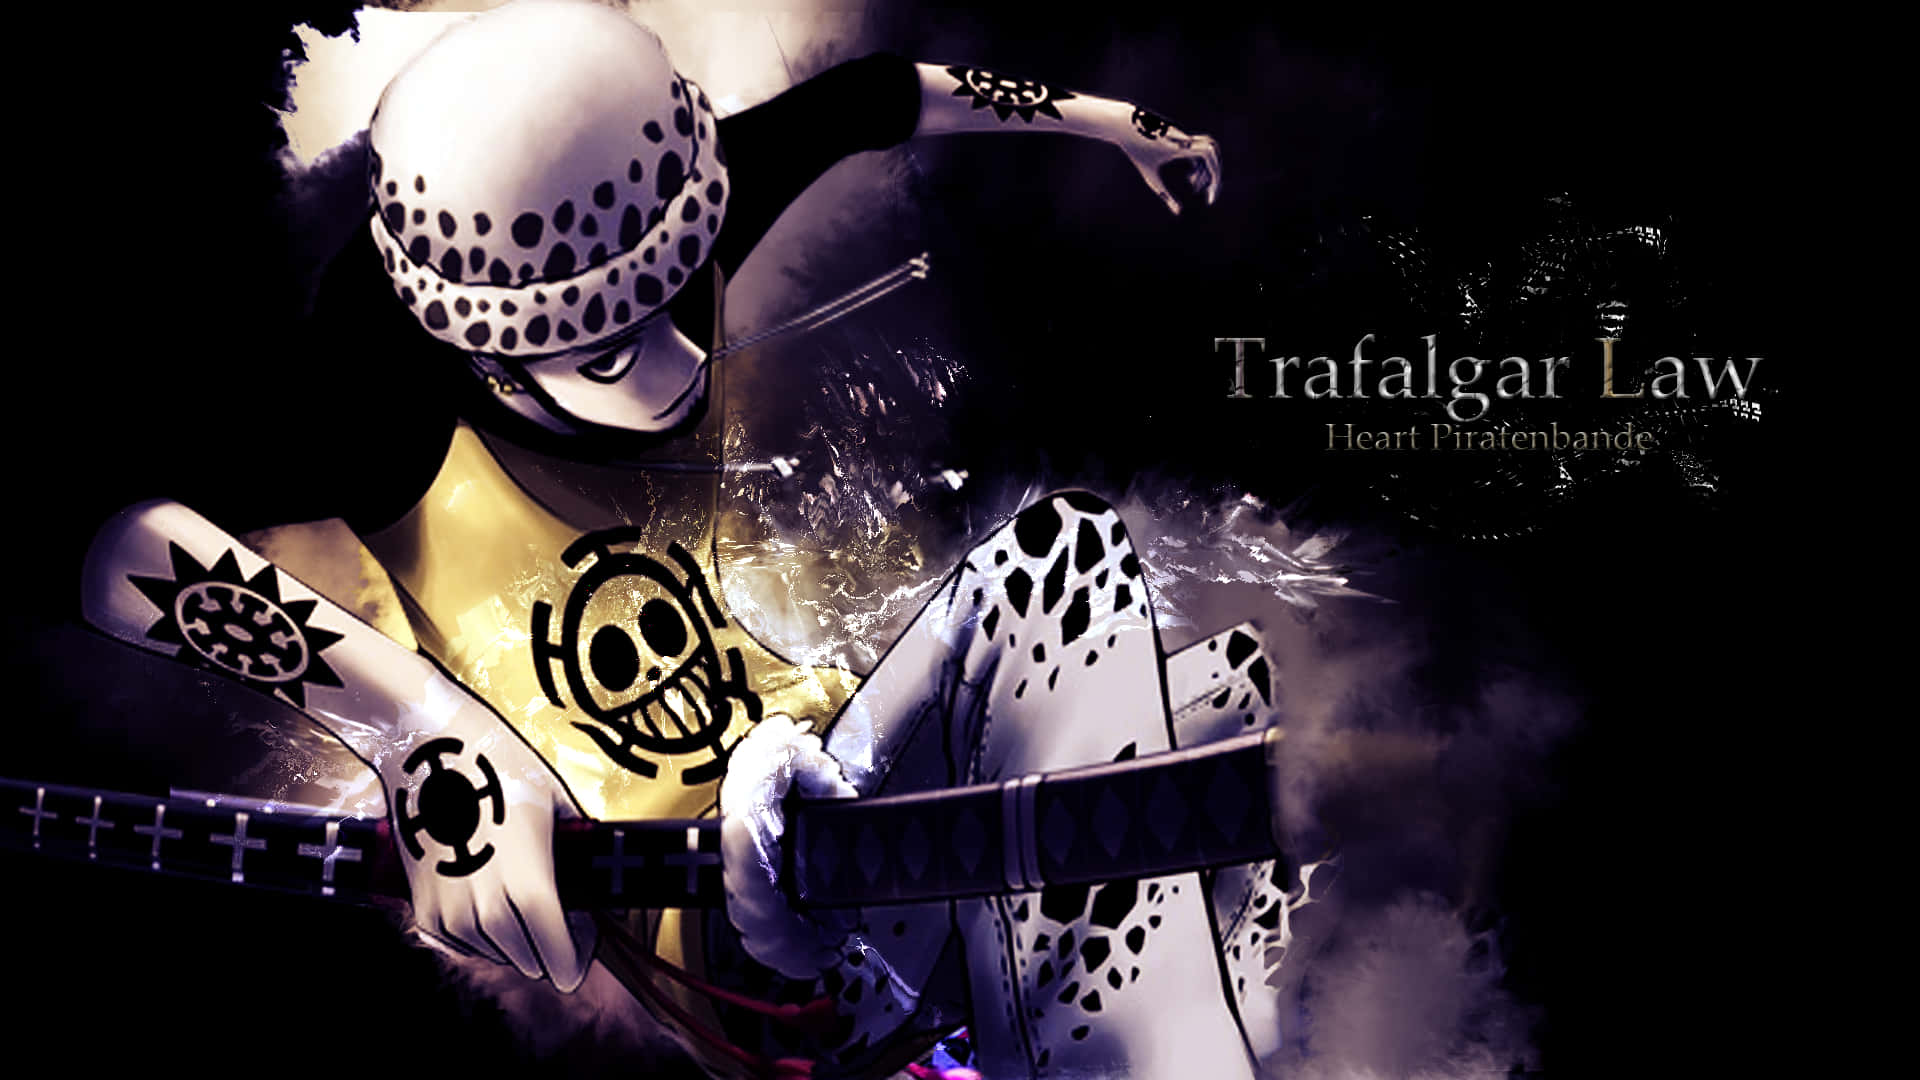 Pirate doctor with a devilish smile - Trafalgar Law from One Piece Wallpaper